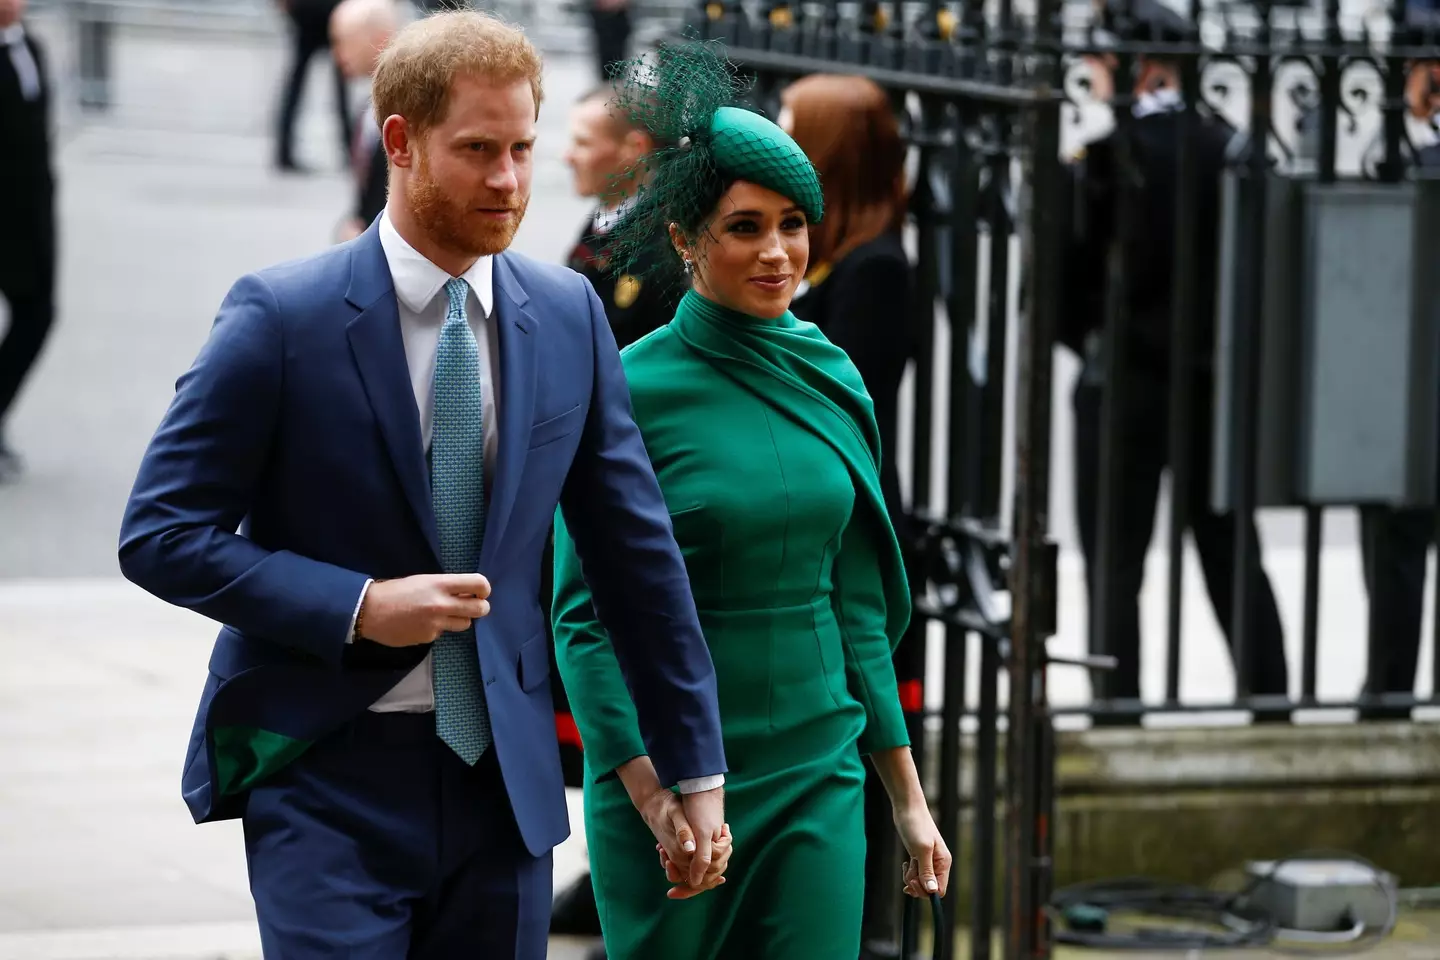 Prince Harry and Meghan visited the UK for the first time since stepping down from senior royal duties. (